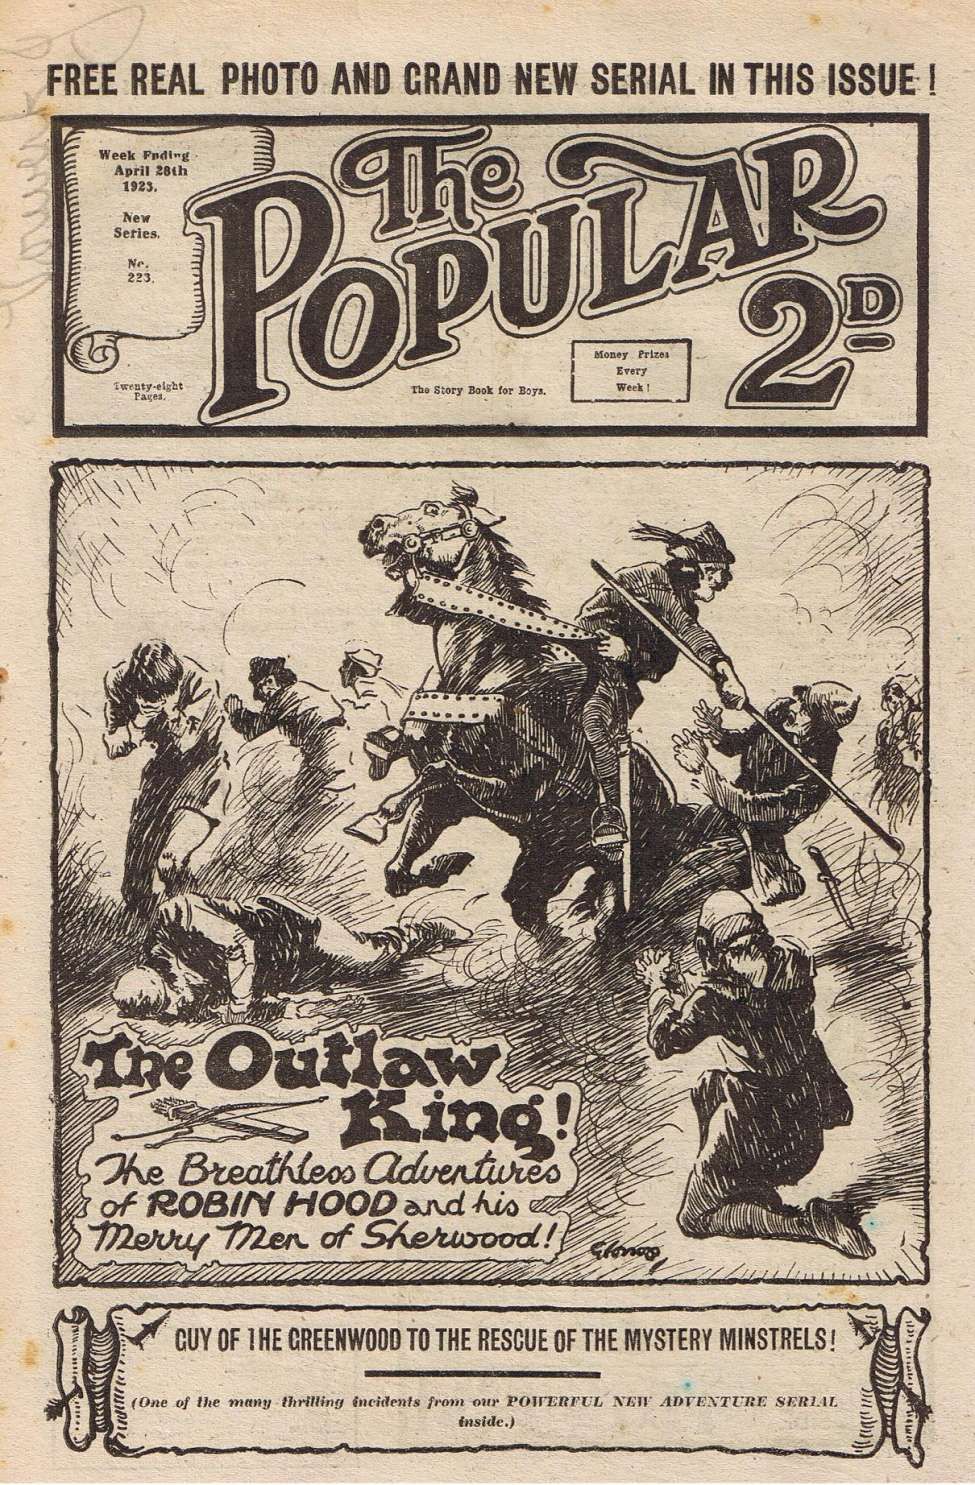 Comic Book Cover For The Popular 223 - The Outlaw King!